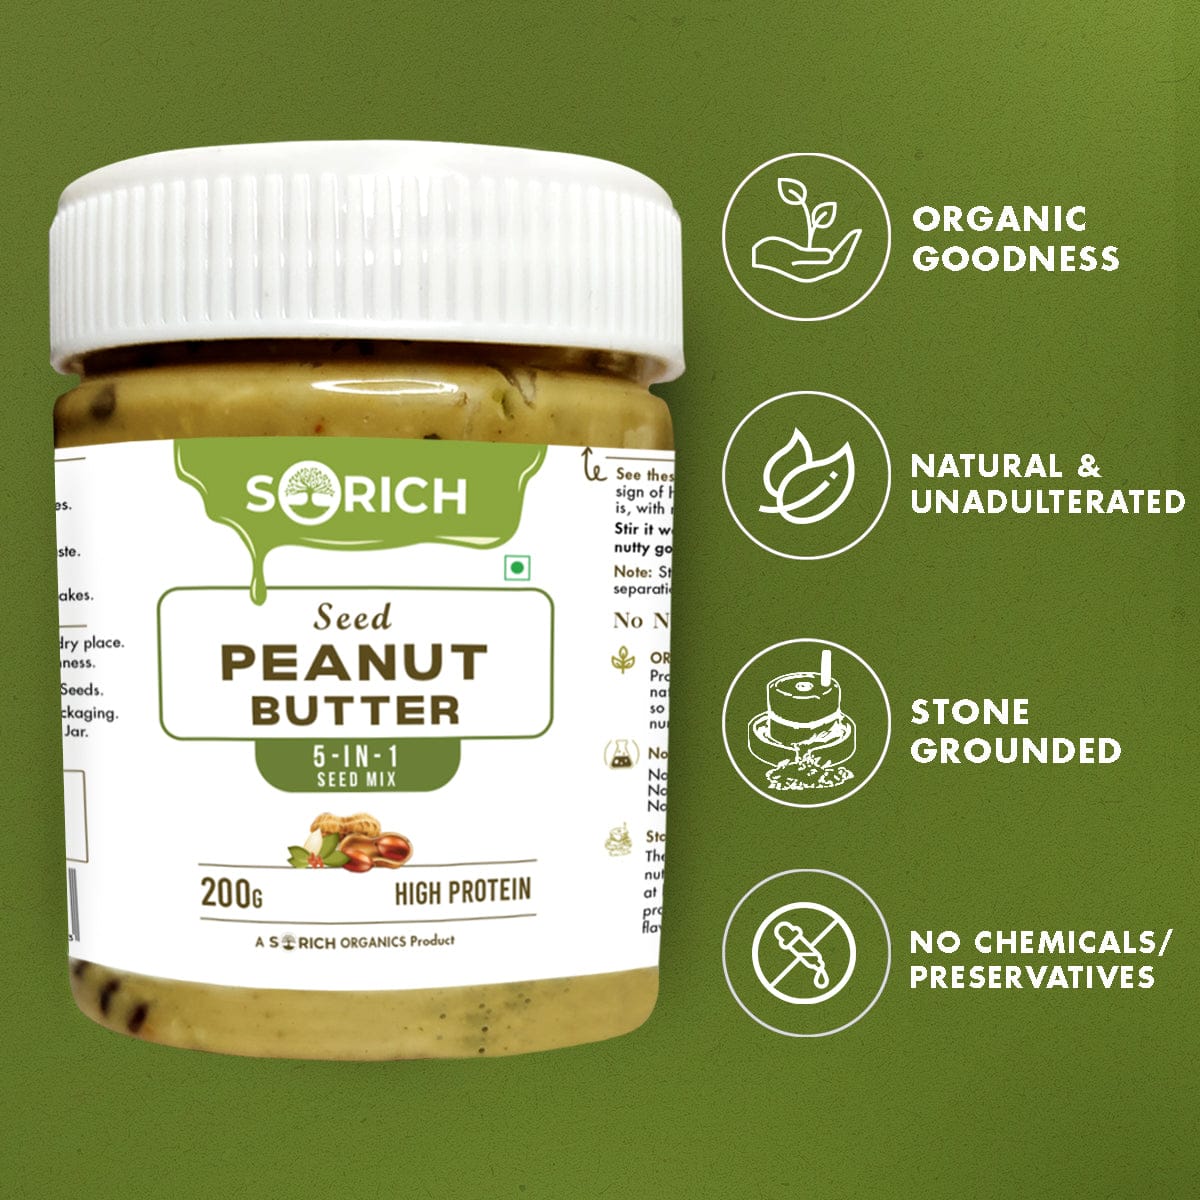 seed peanut butter benefits